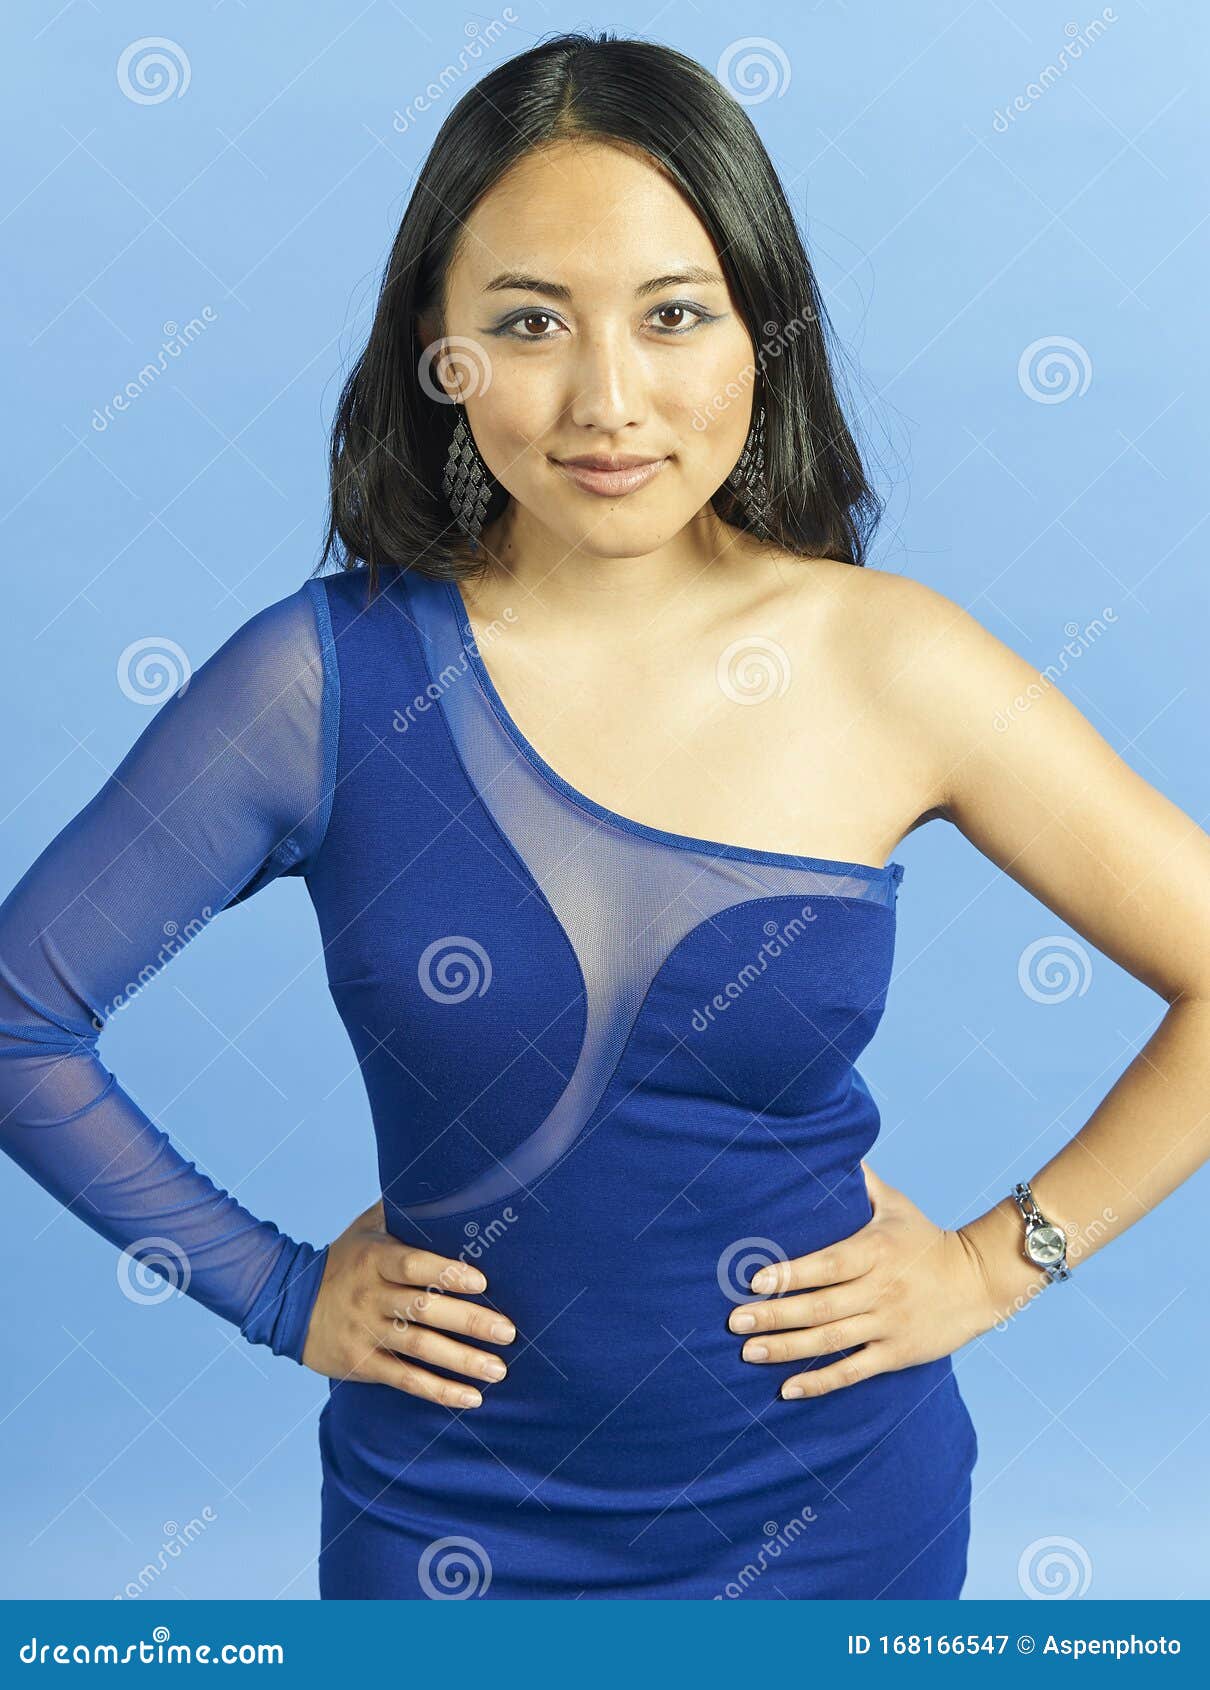 Gorgeous Asian Model Poses In Blue Dress Stock Image